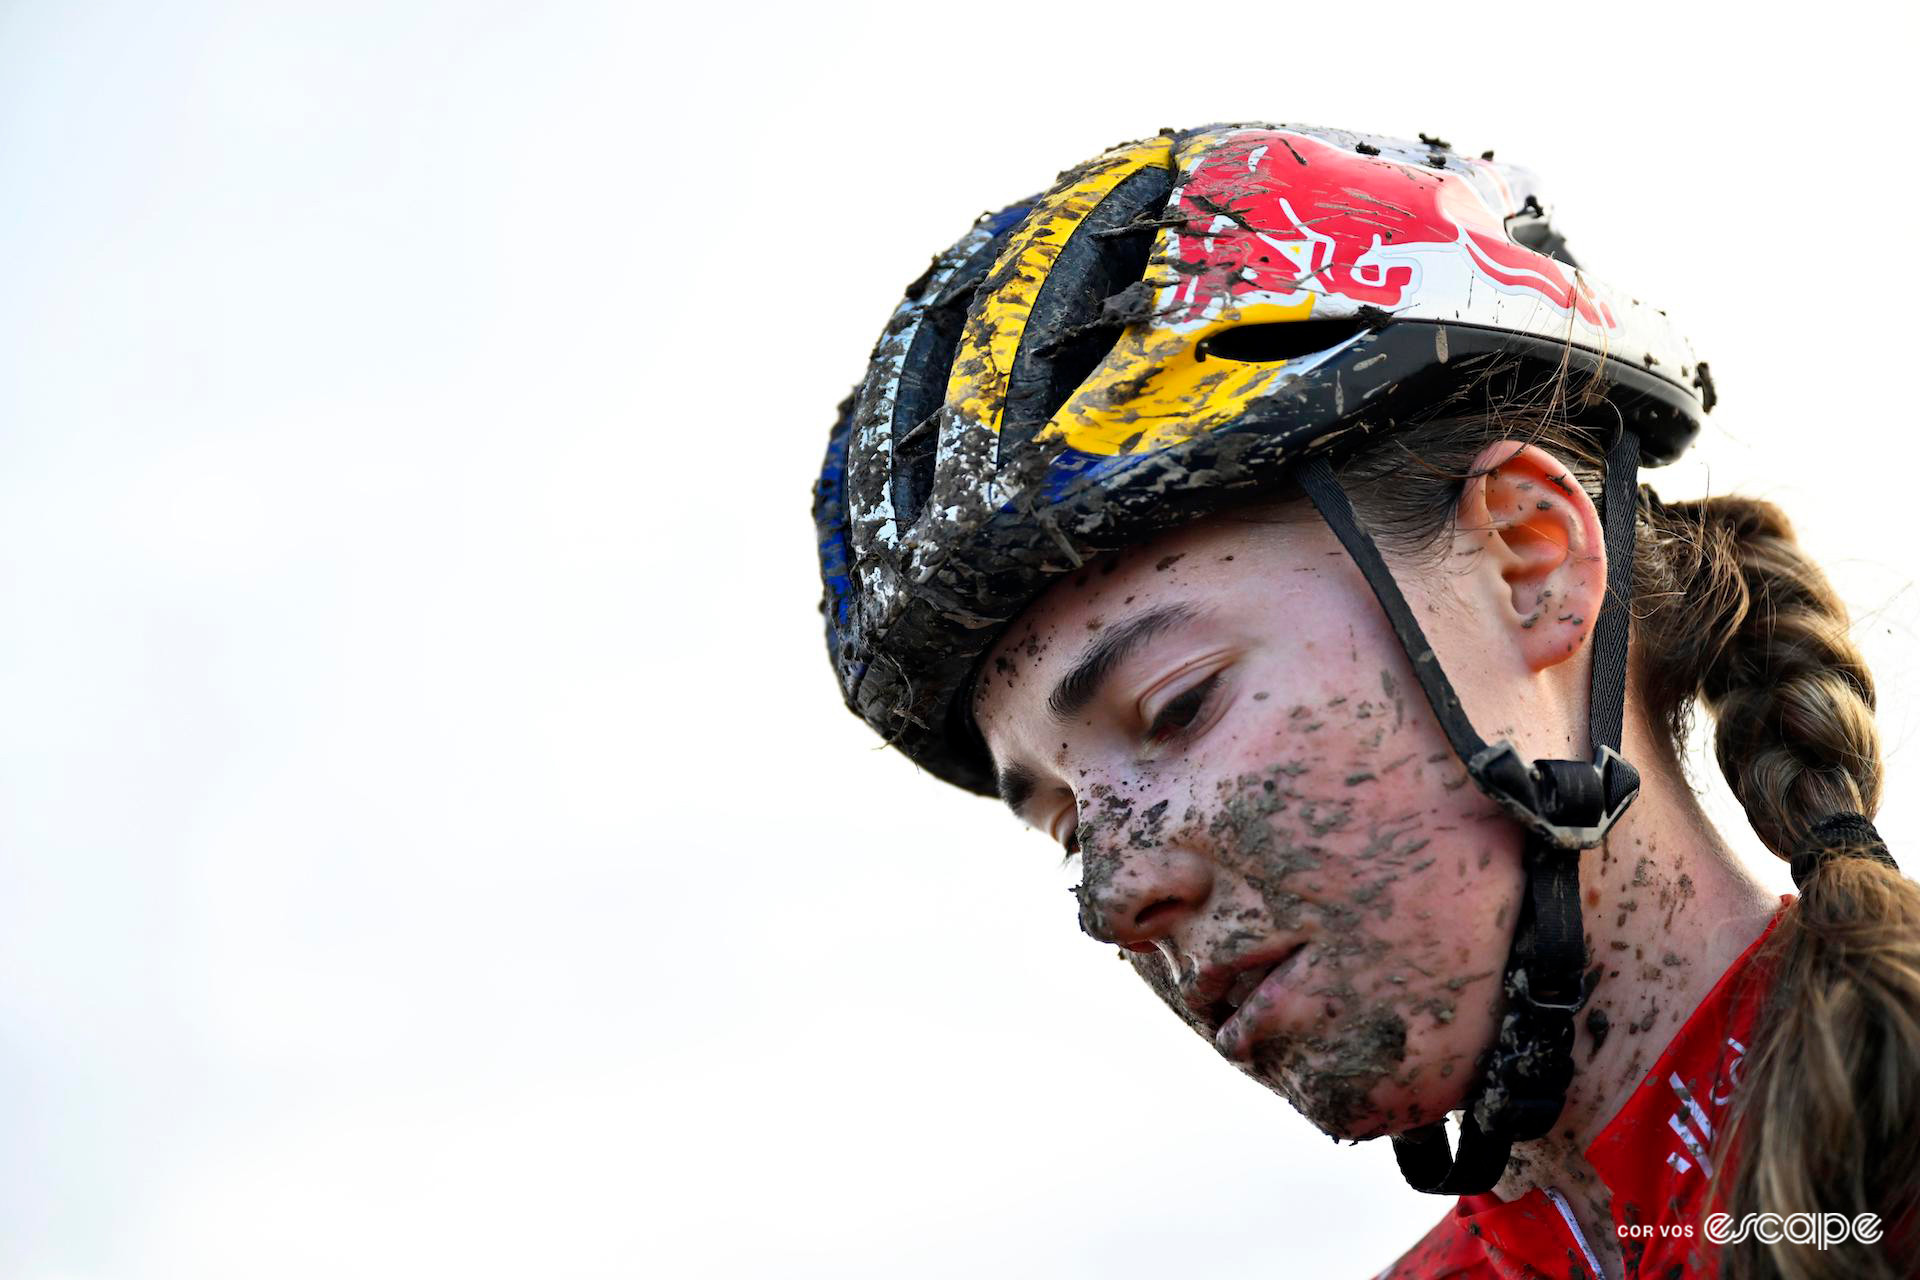 Close-up of Blanka Vas, her face and Red Bull-branded helmet splattered with mud, after Cyclocross World Cup Flamanville.